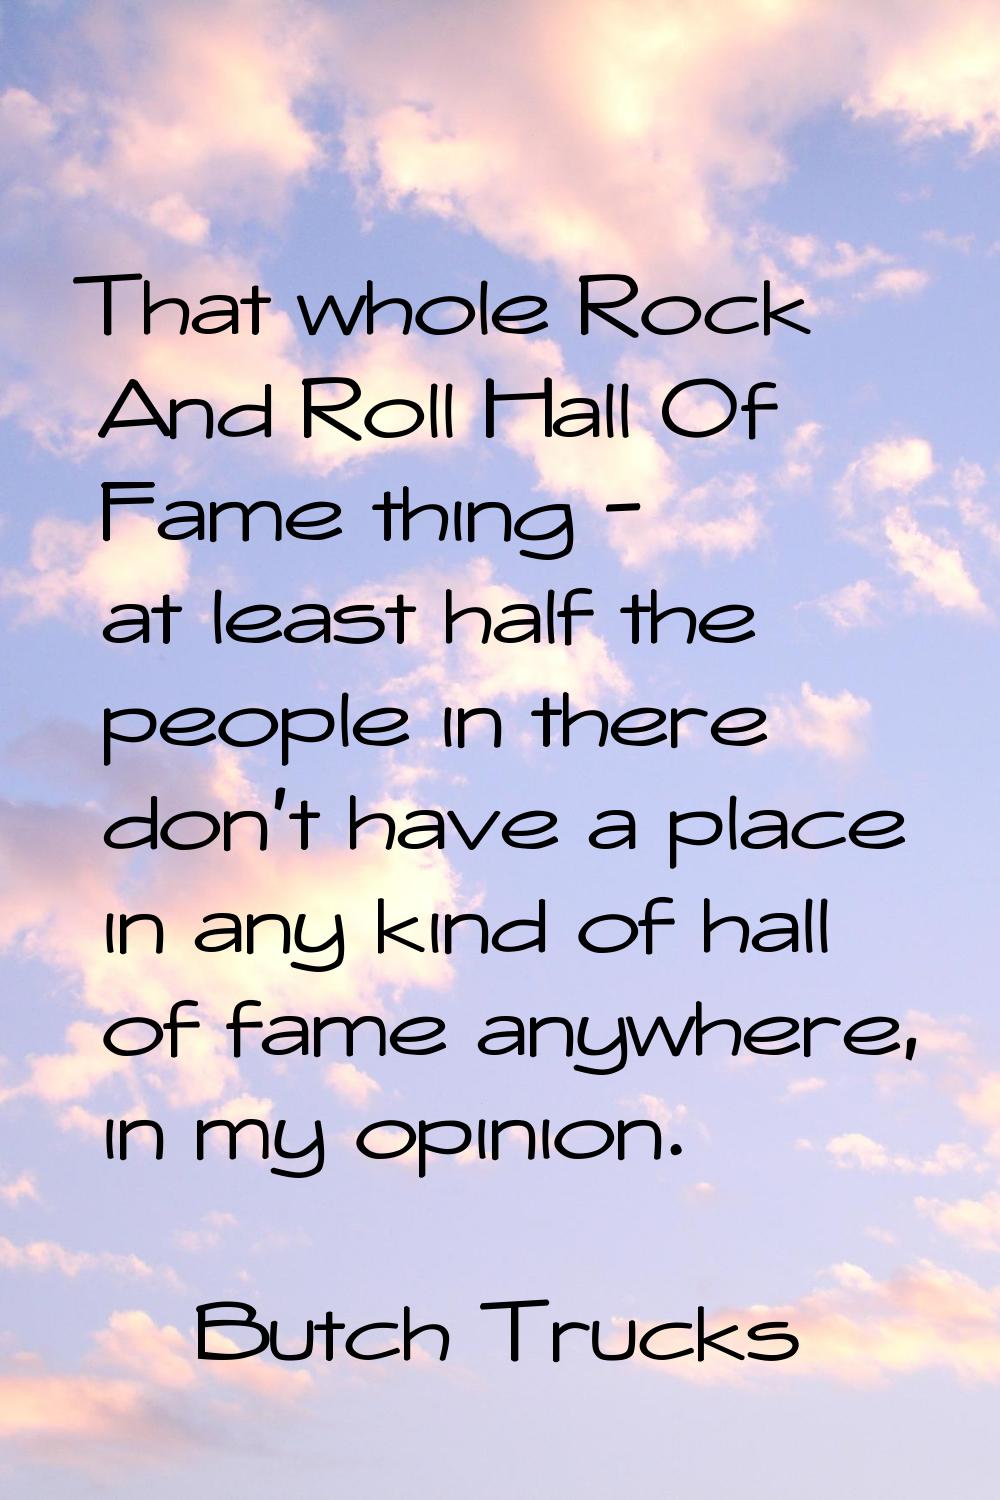 That whole Rock And Roll Hall Of Fame thing - at least half the people in there don't have a place 